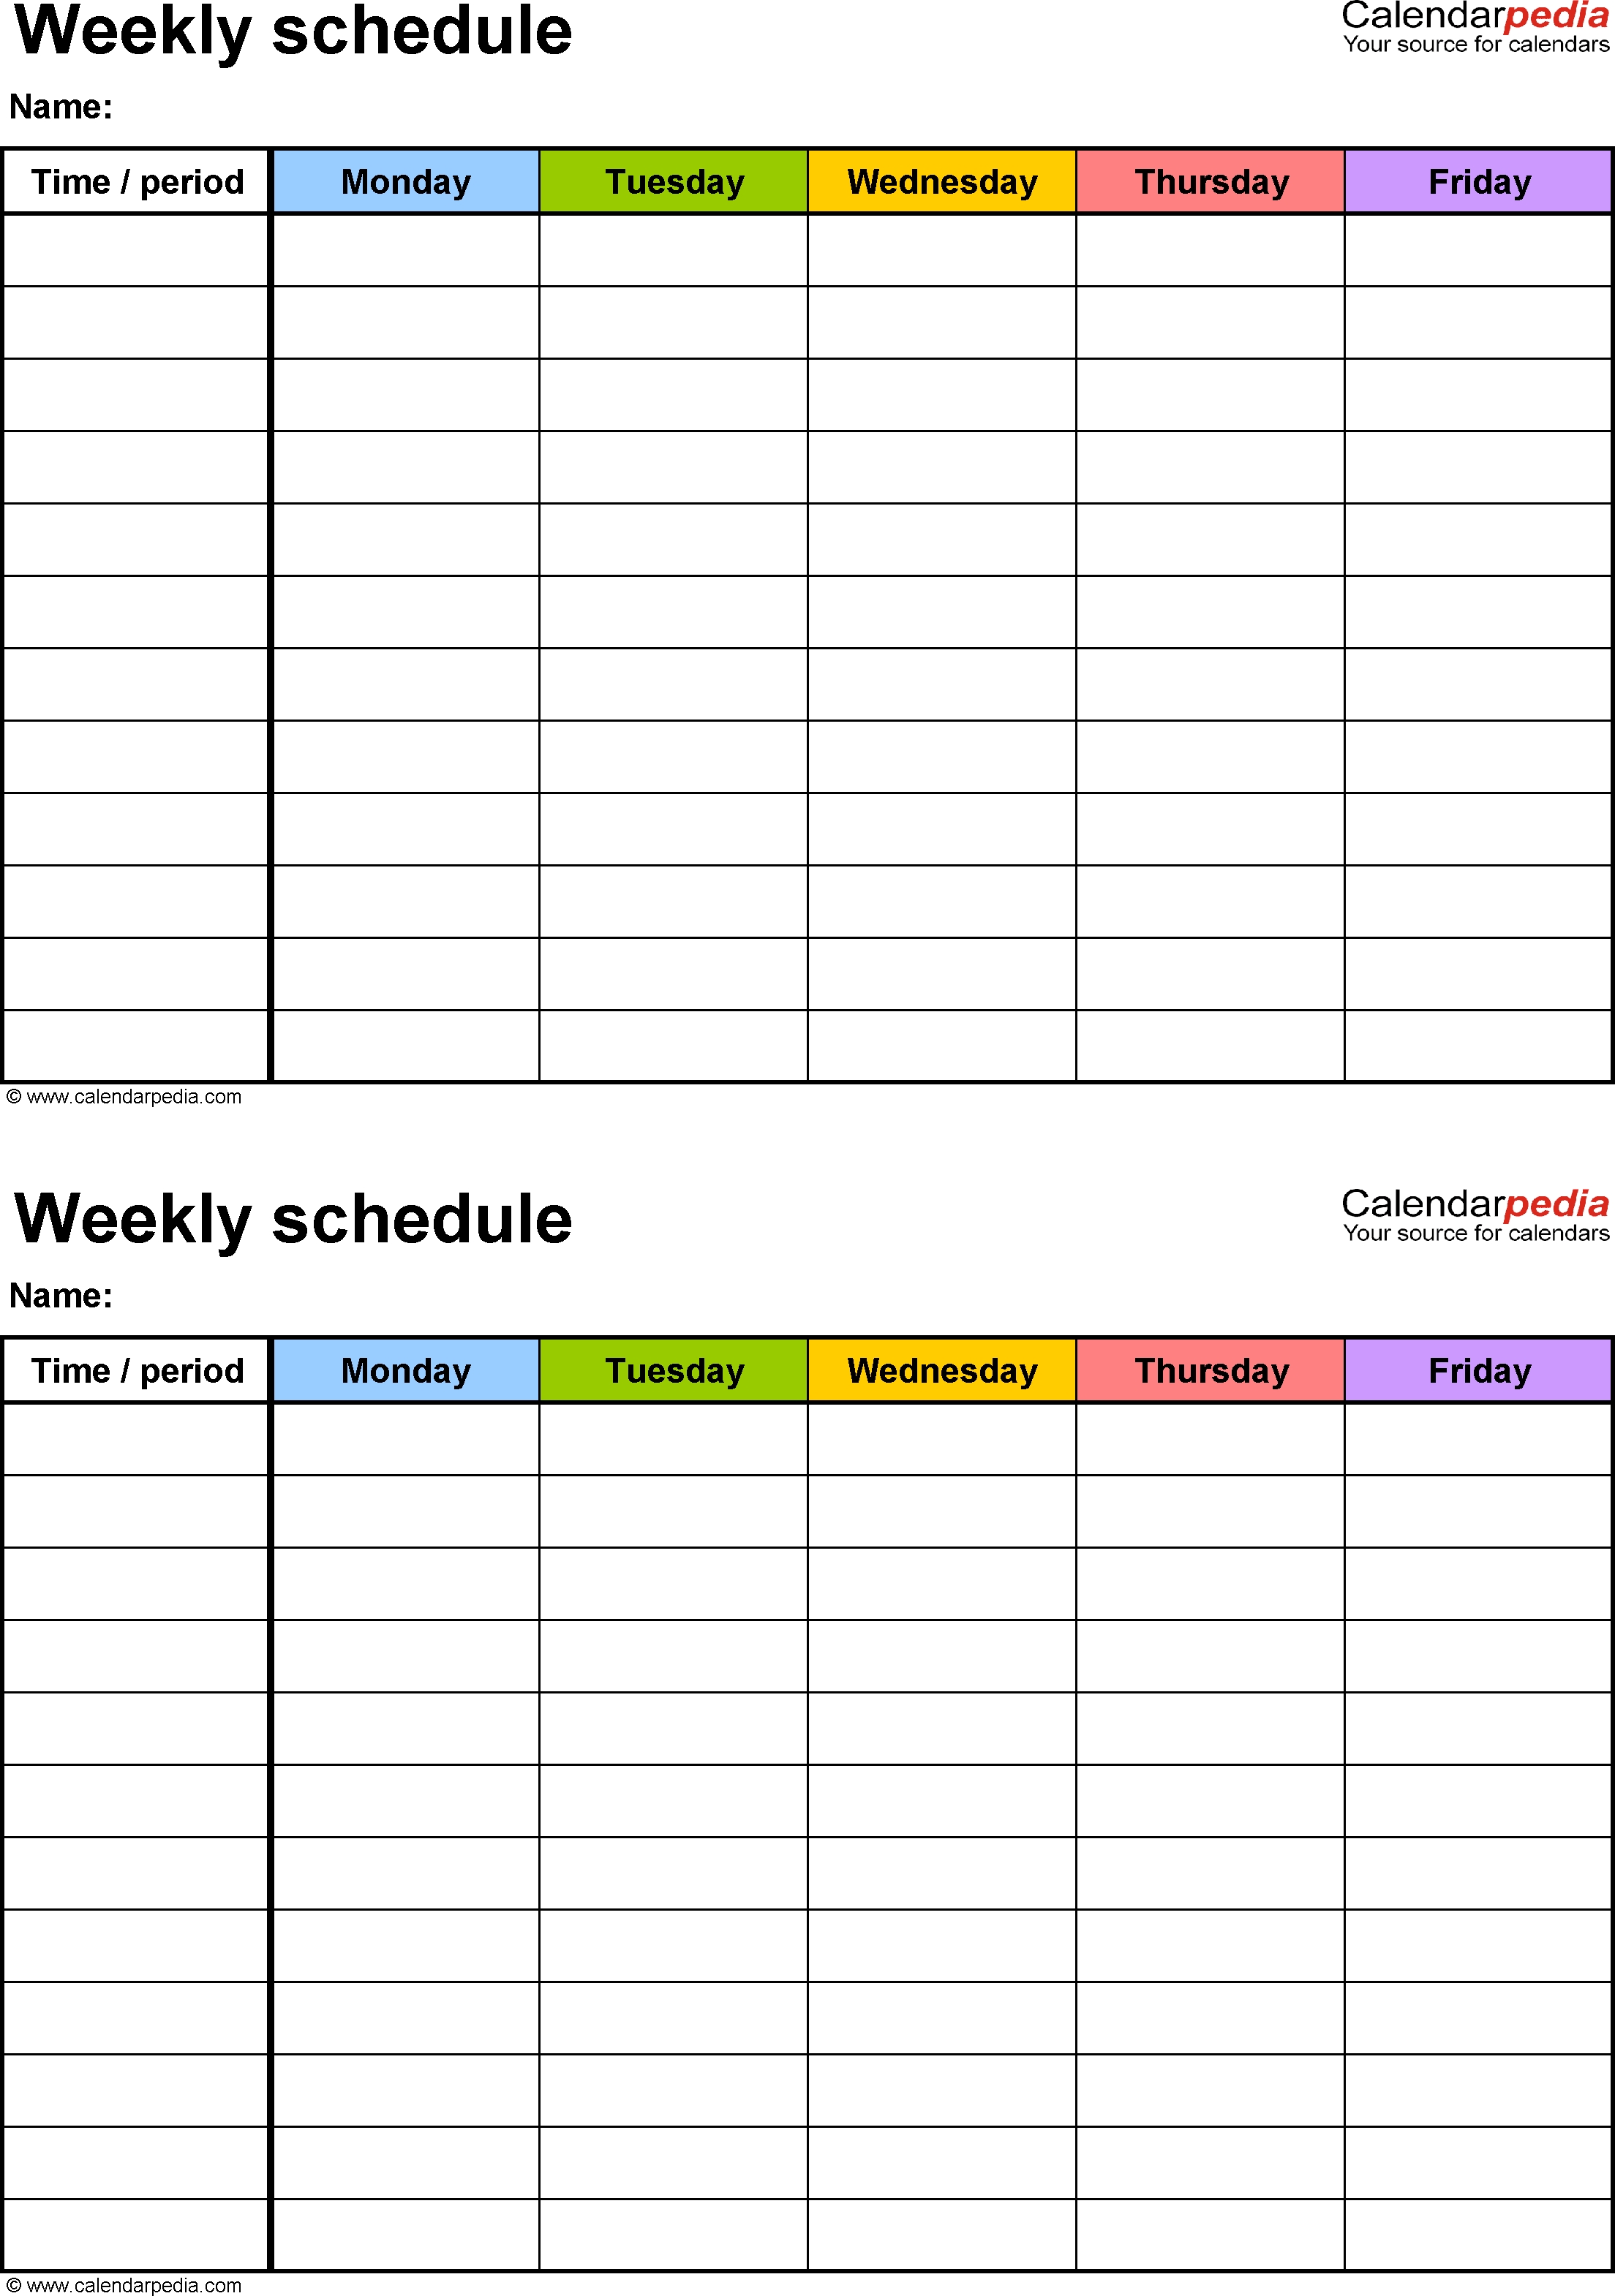 Free Weekly Schedule Templates For Word - 18 Templates-Monday Thru Friday Schedule Template